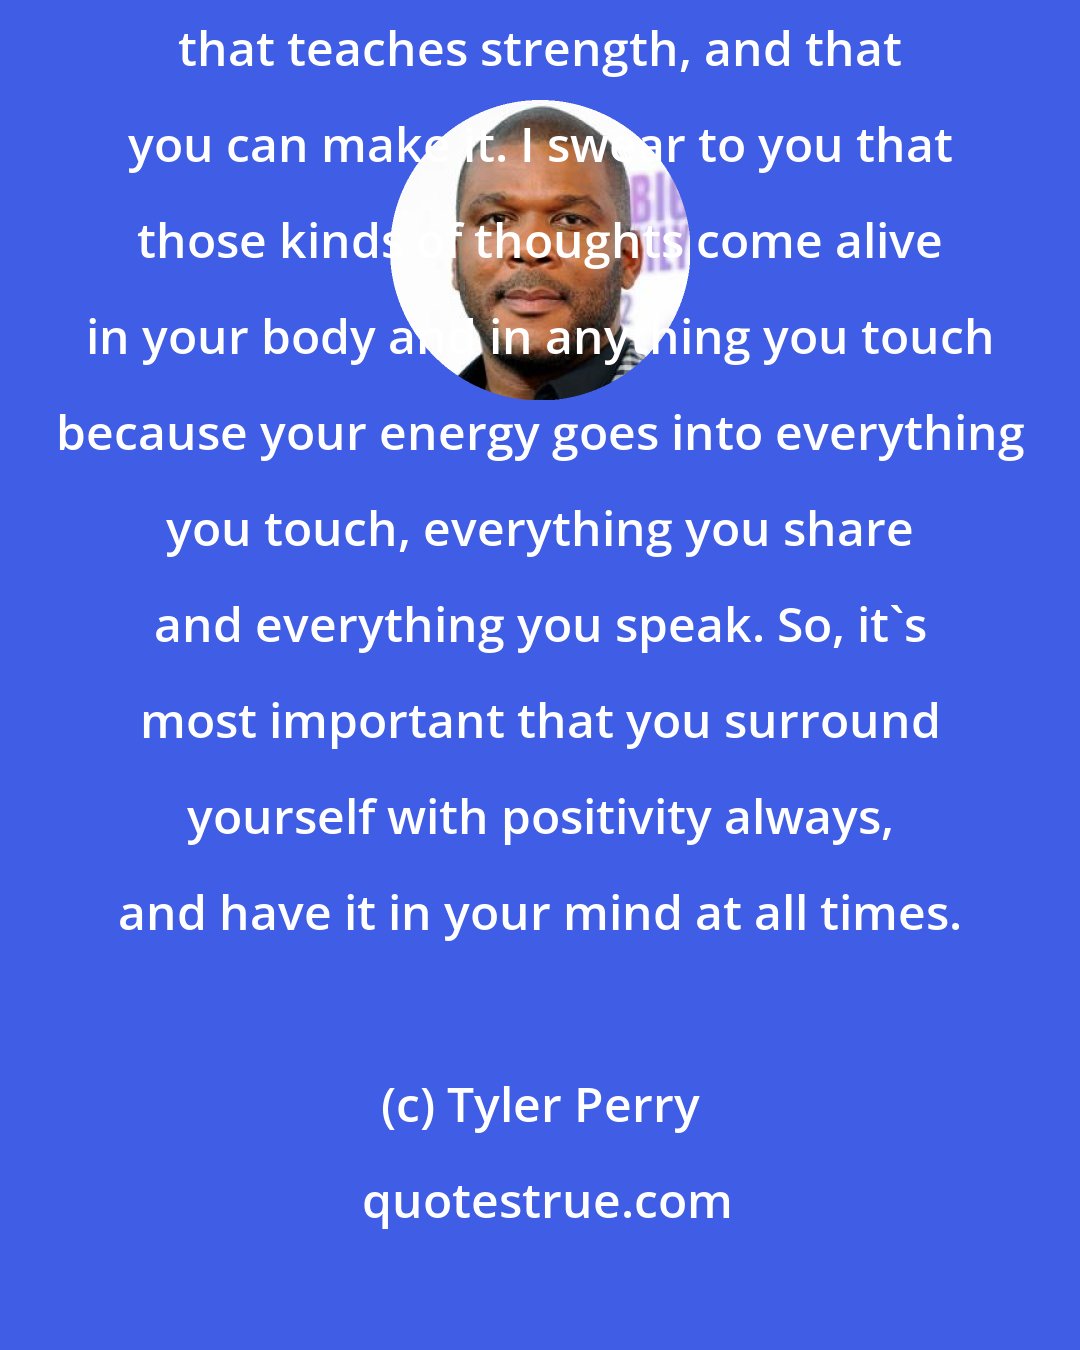 Tyler Perry: I always feed myself positivity. I turn to anything that teaches good, that teaches strength, and that you can make it. I swear to you that those kinds of thoughts come alive in your body and in anything you touch because your energy goes into everything you touch, everything you share and everything you speak. So, it's most important that you surround yourself with positivity always, and have it in your mind at all times.